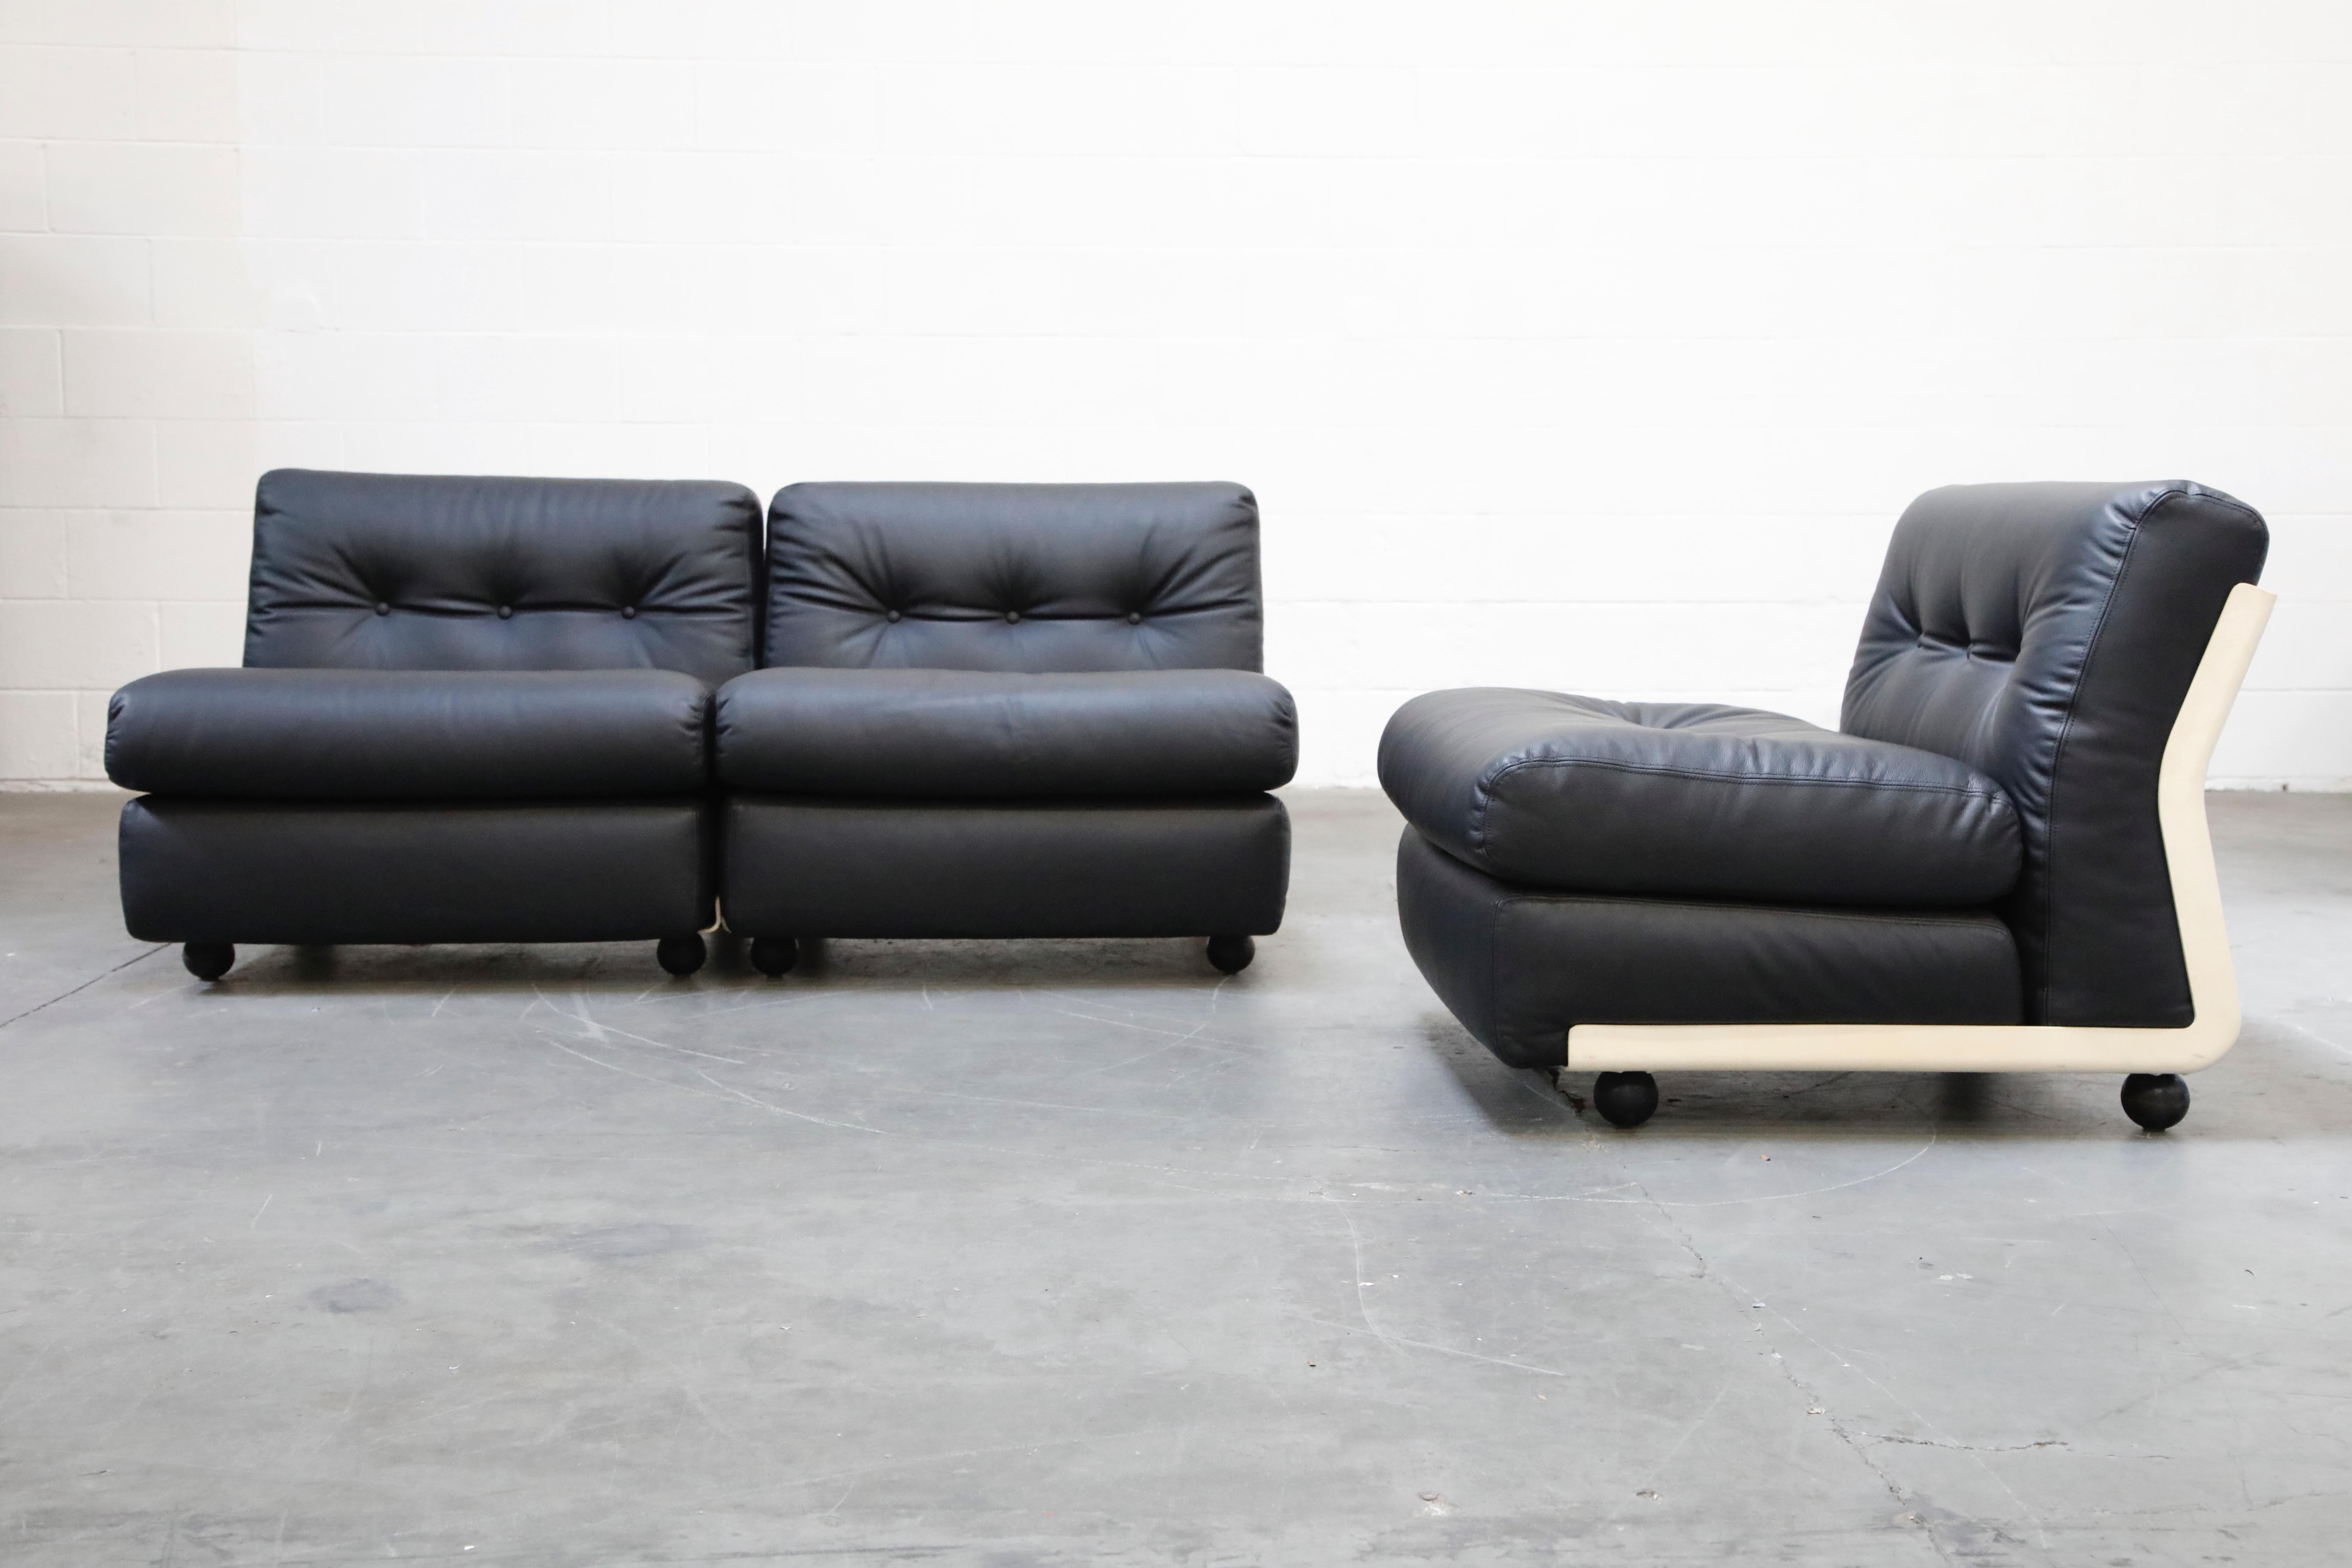 Mid-20th Century 'Amanta' Sectional Lounges by Mario Bellini for C&B Italia, circa 1966, Signed